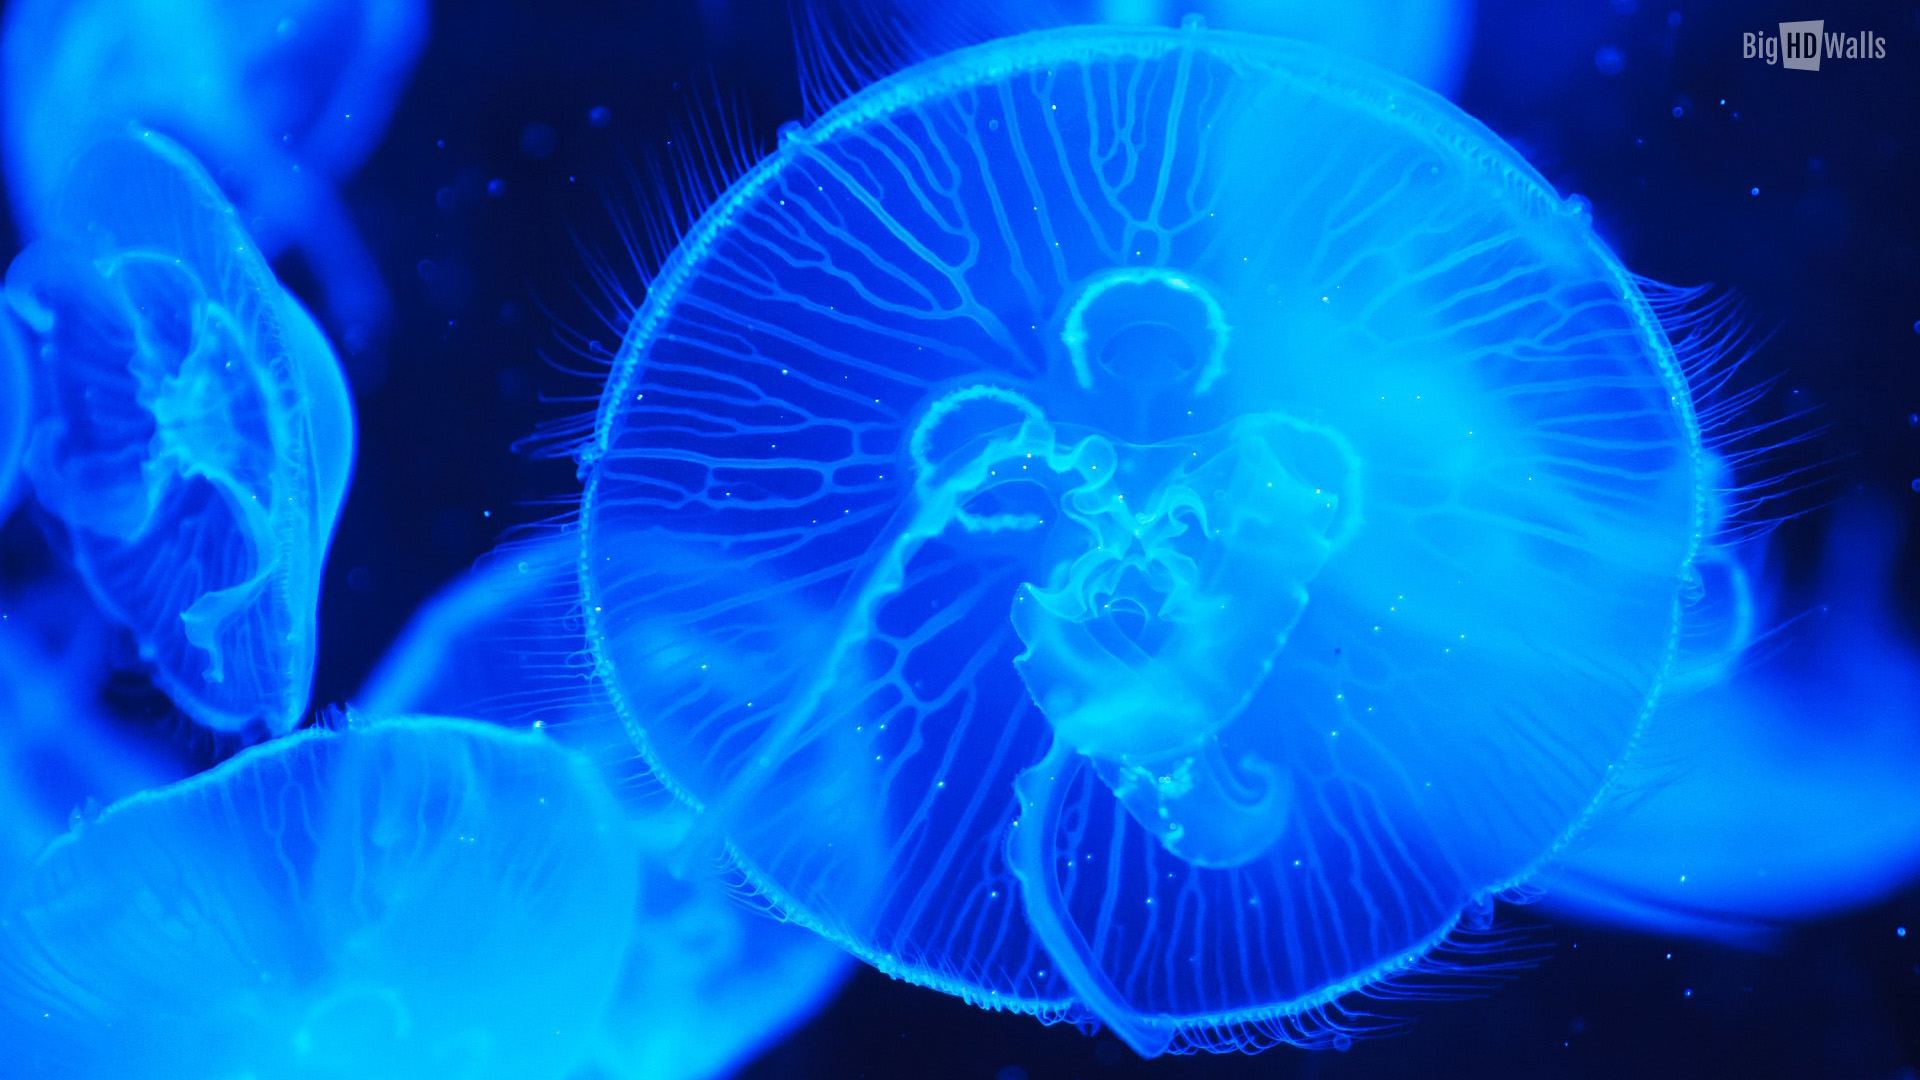 An Amazing Wallpaper Of Deep Sea Jelly Fish Like Creature Click On